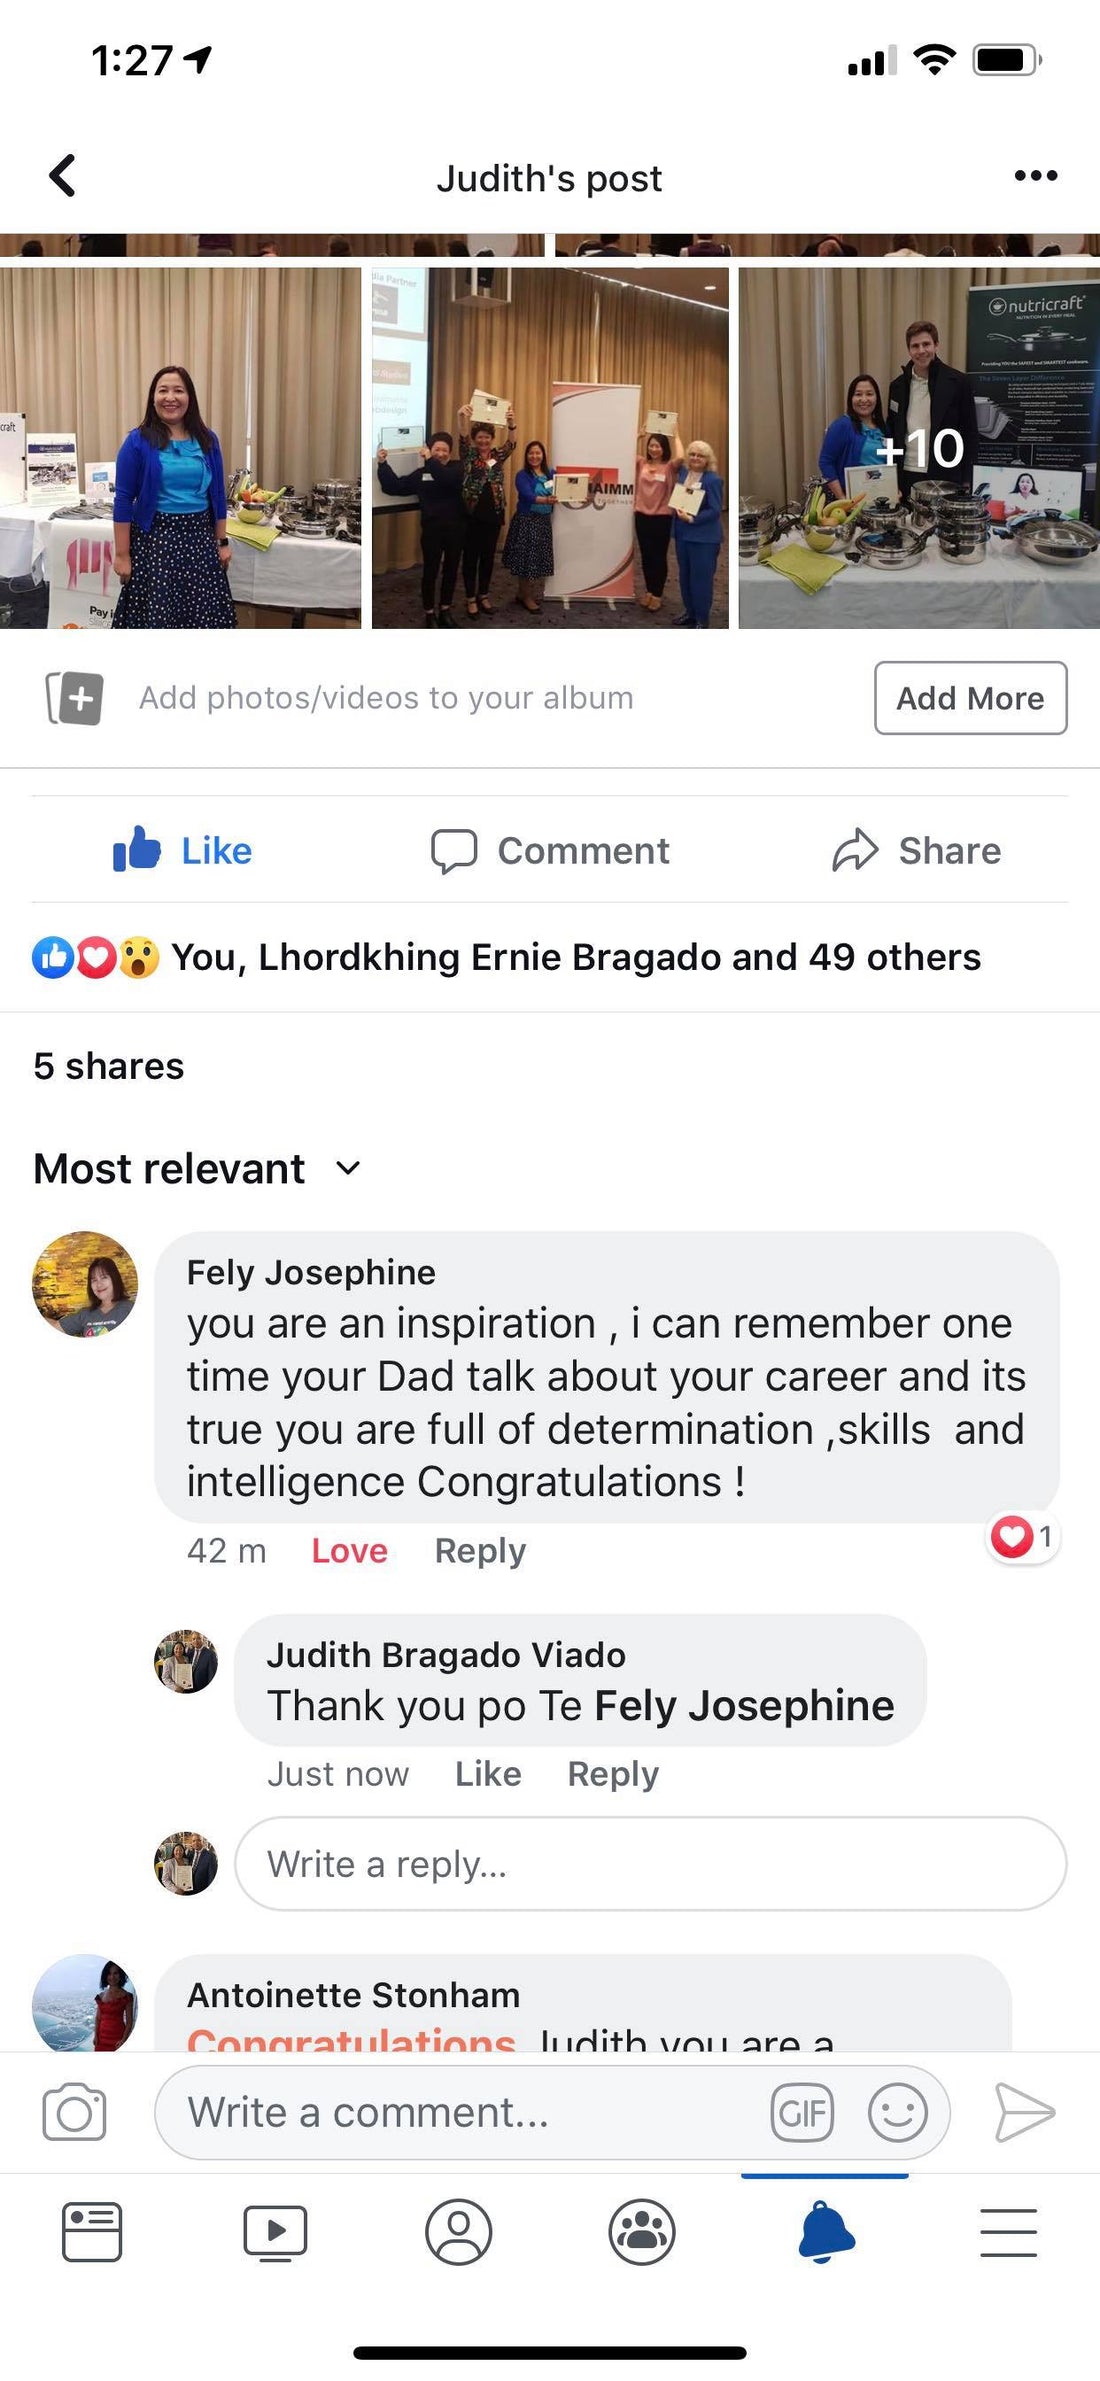 Fely Josephine: You are an inspiration!